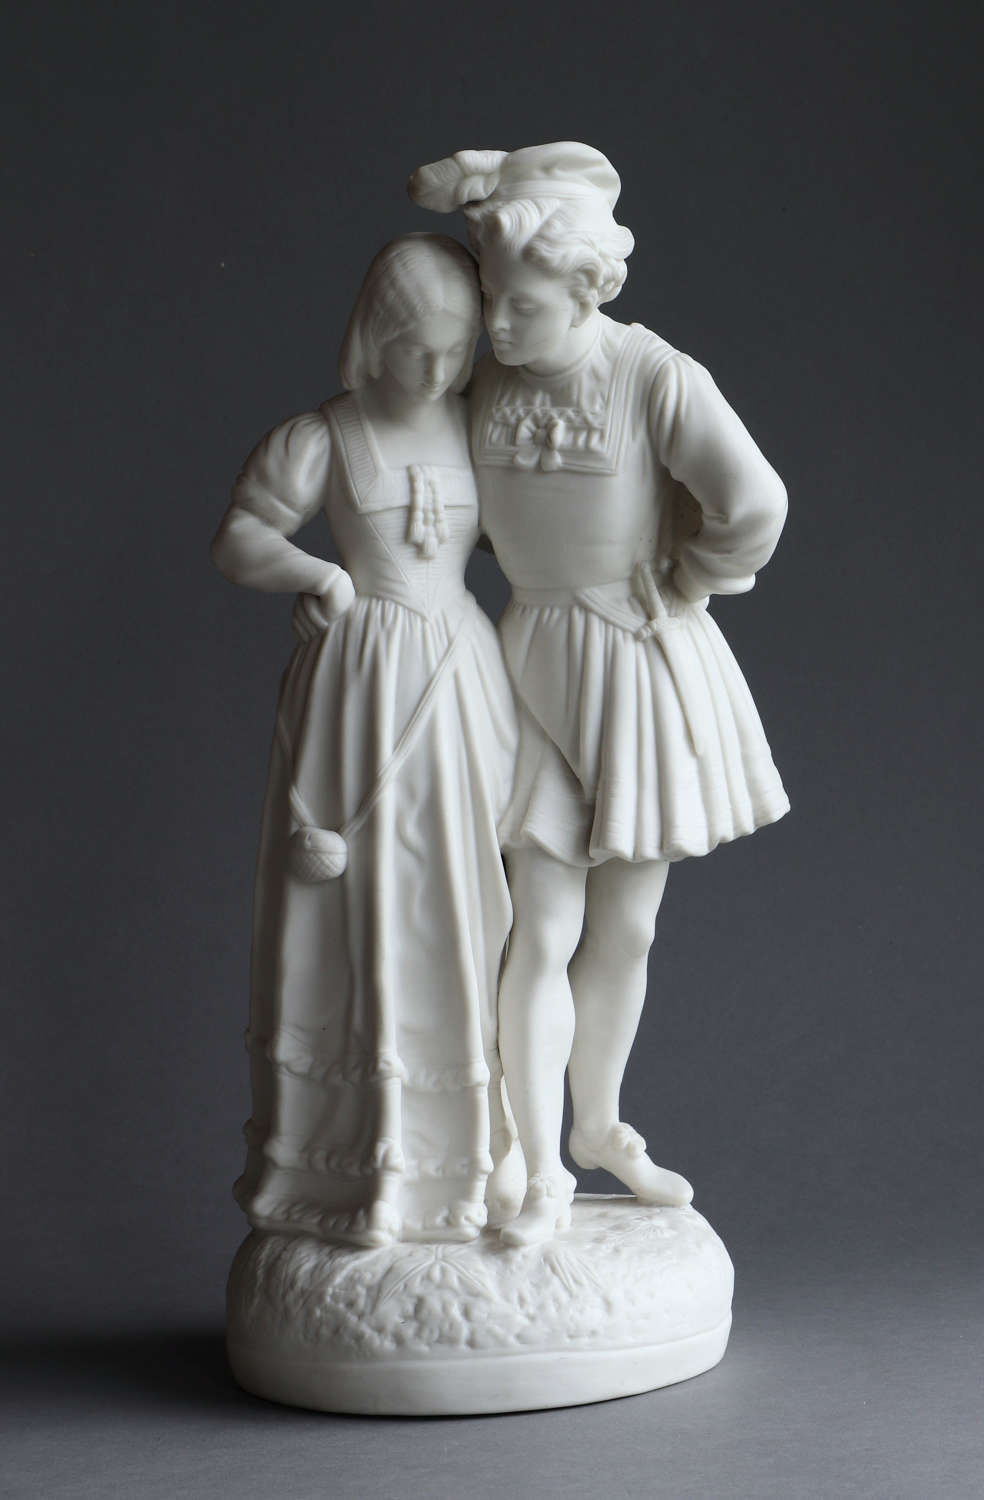 A Parian group of a pair of young lovers in medieval dress